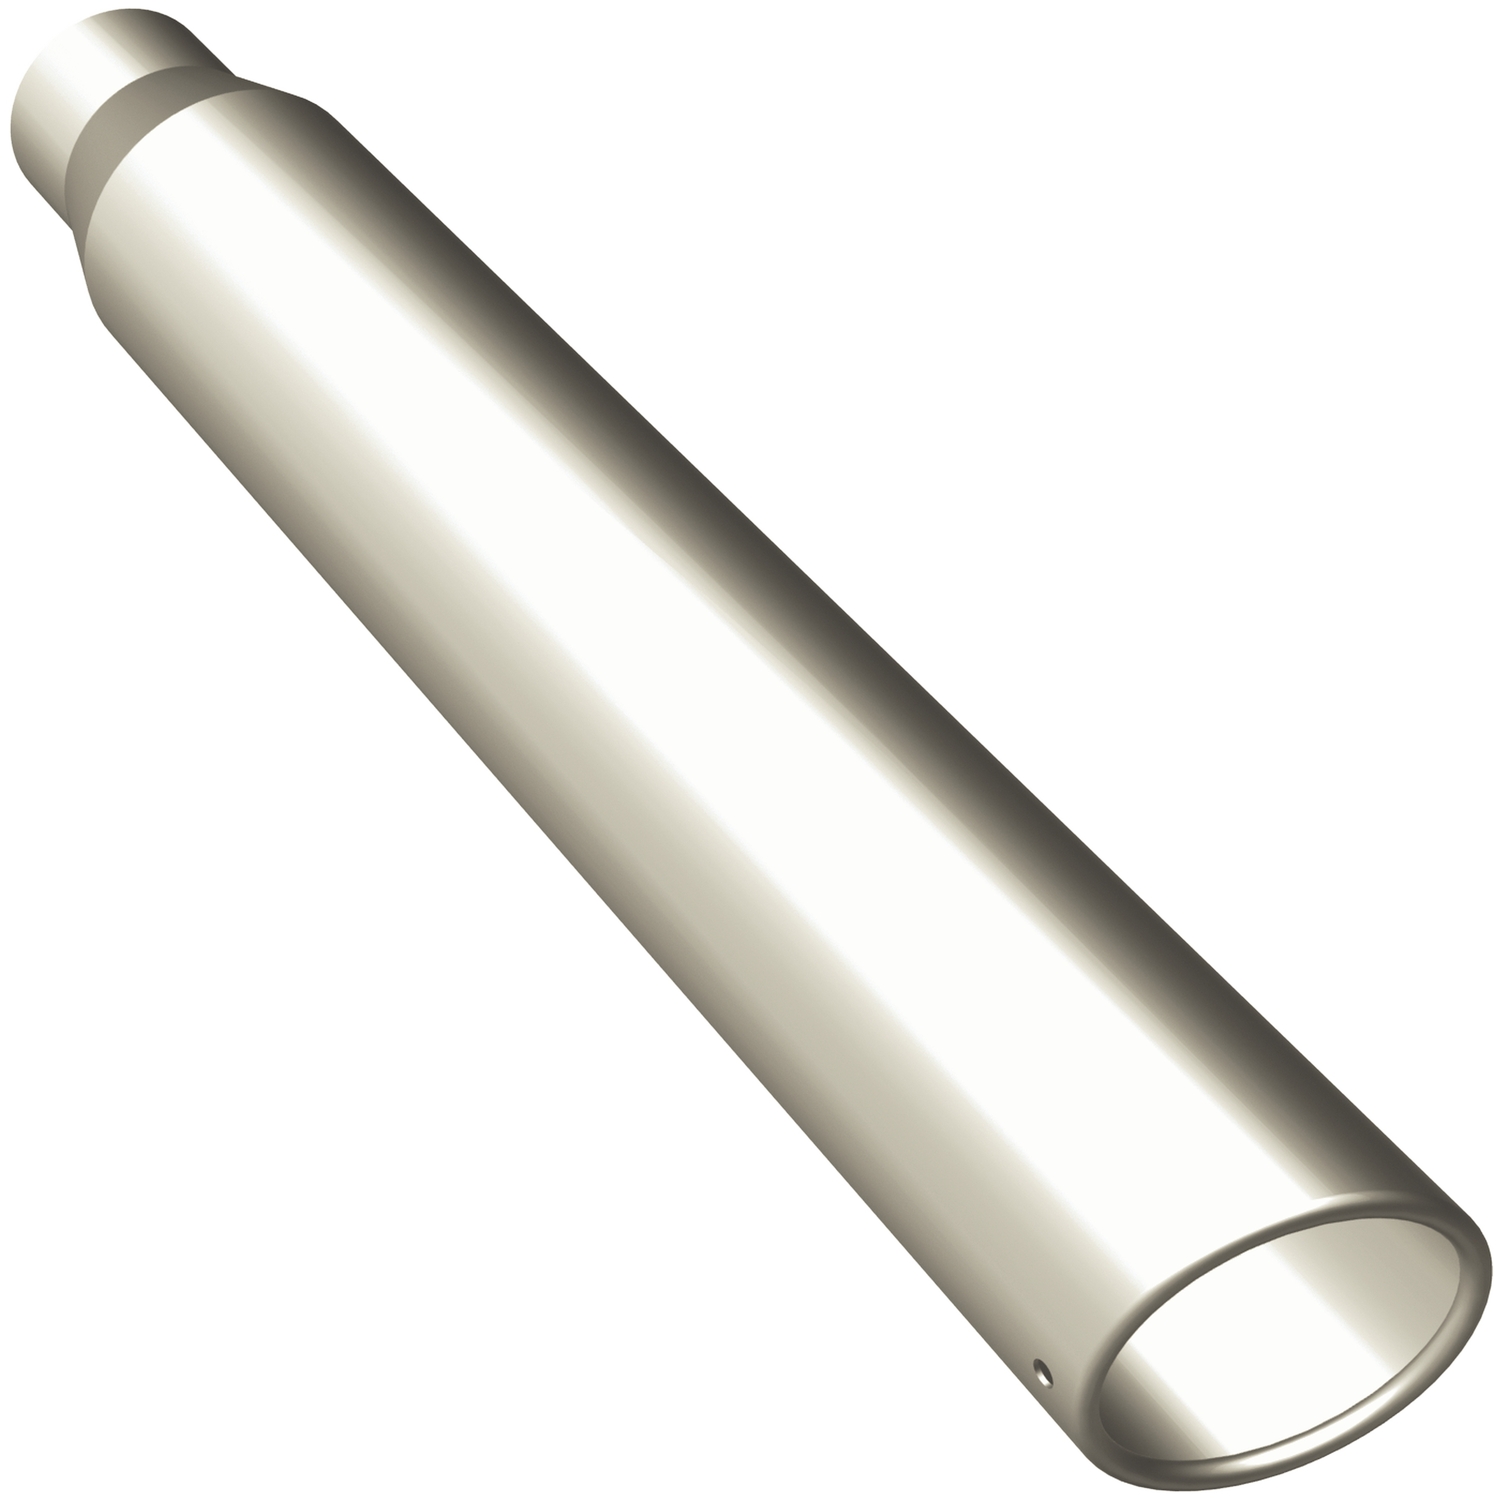 Polished Stainless Steel Weld-On Single Exhaust Tip Inlet Inside Diameter: 2.5"